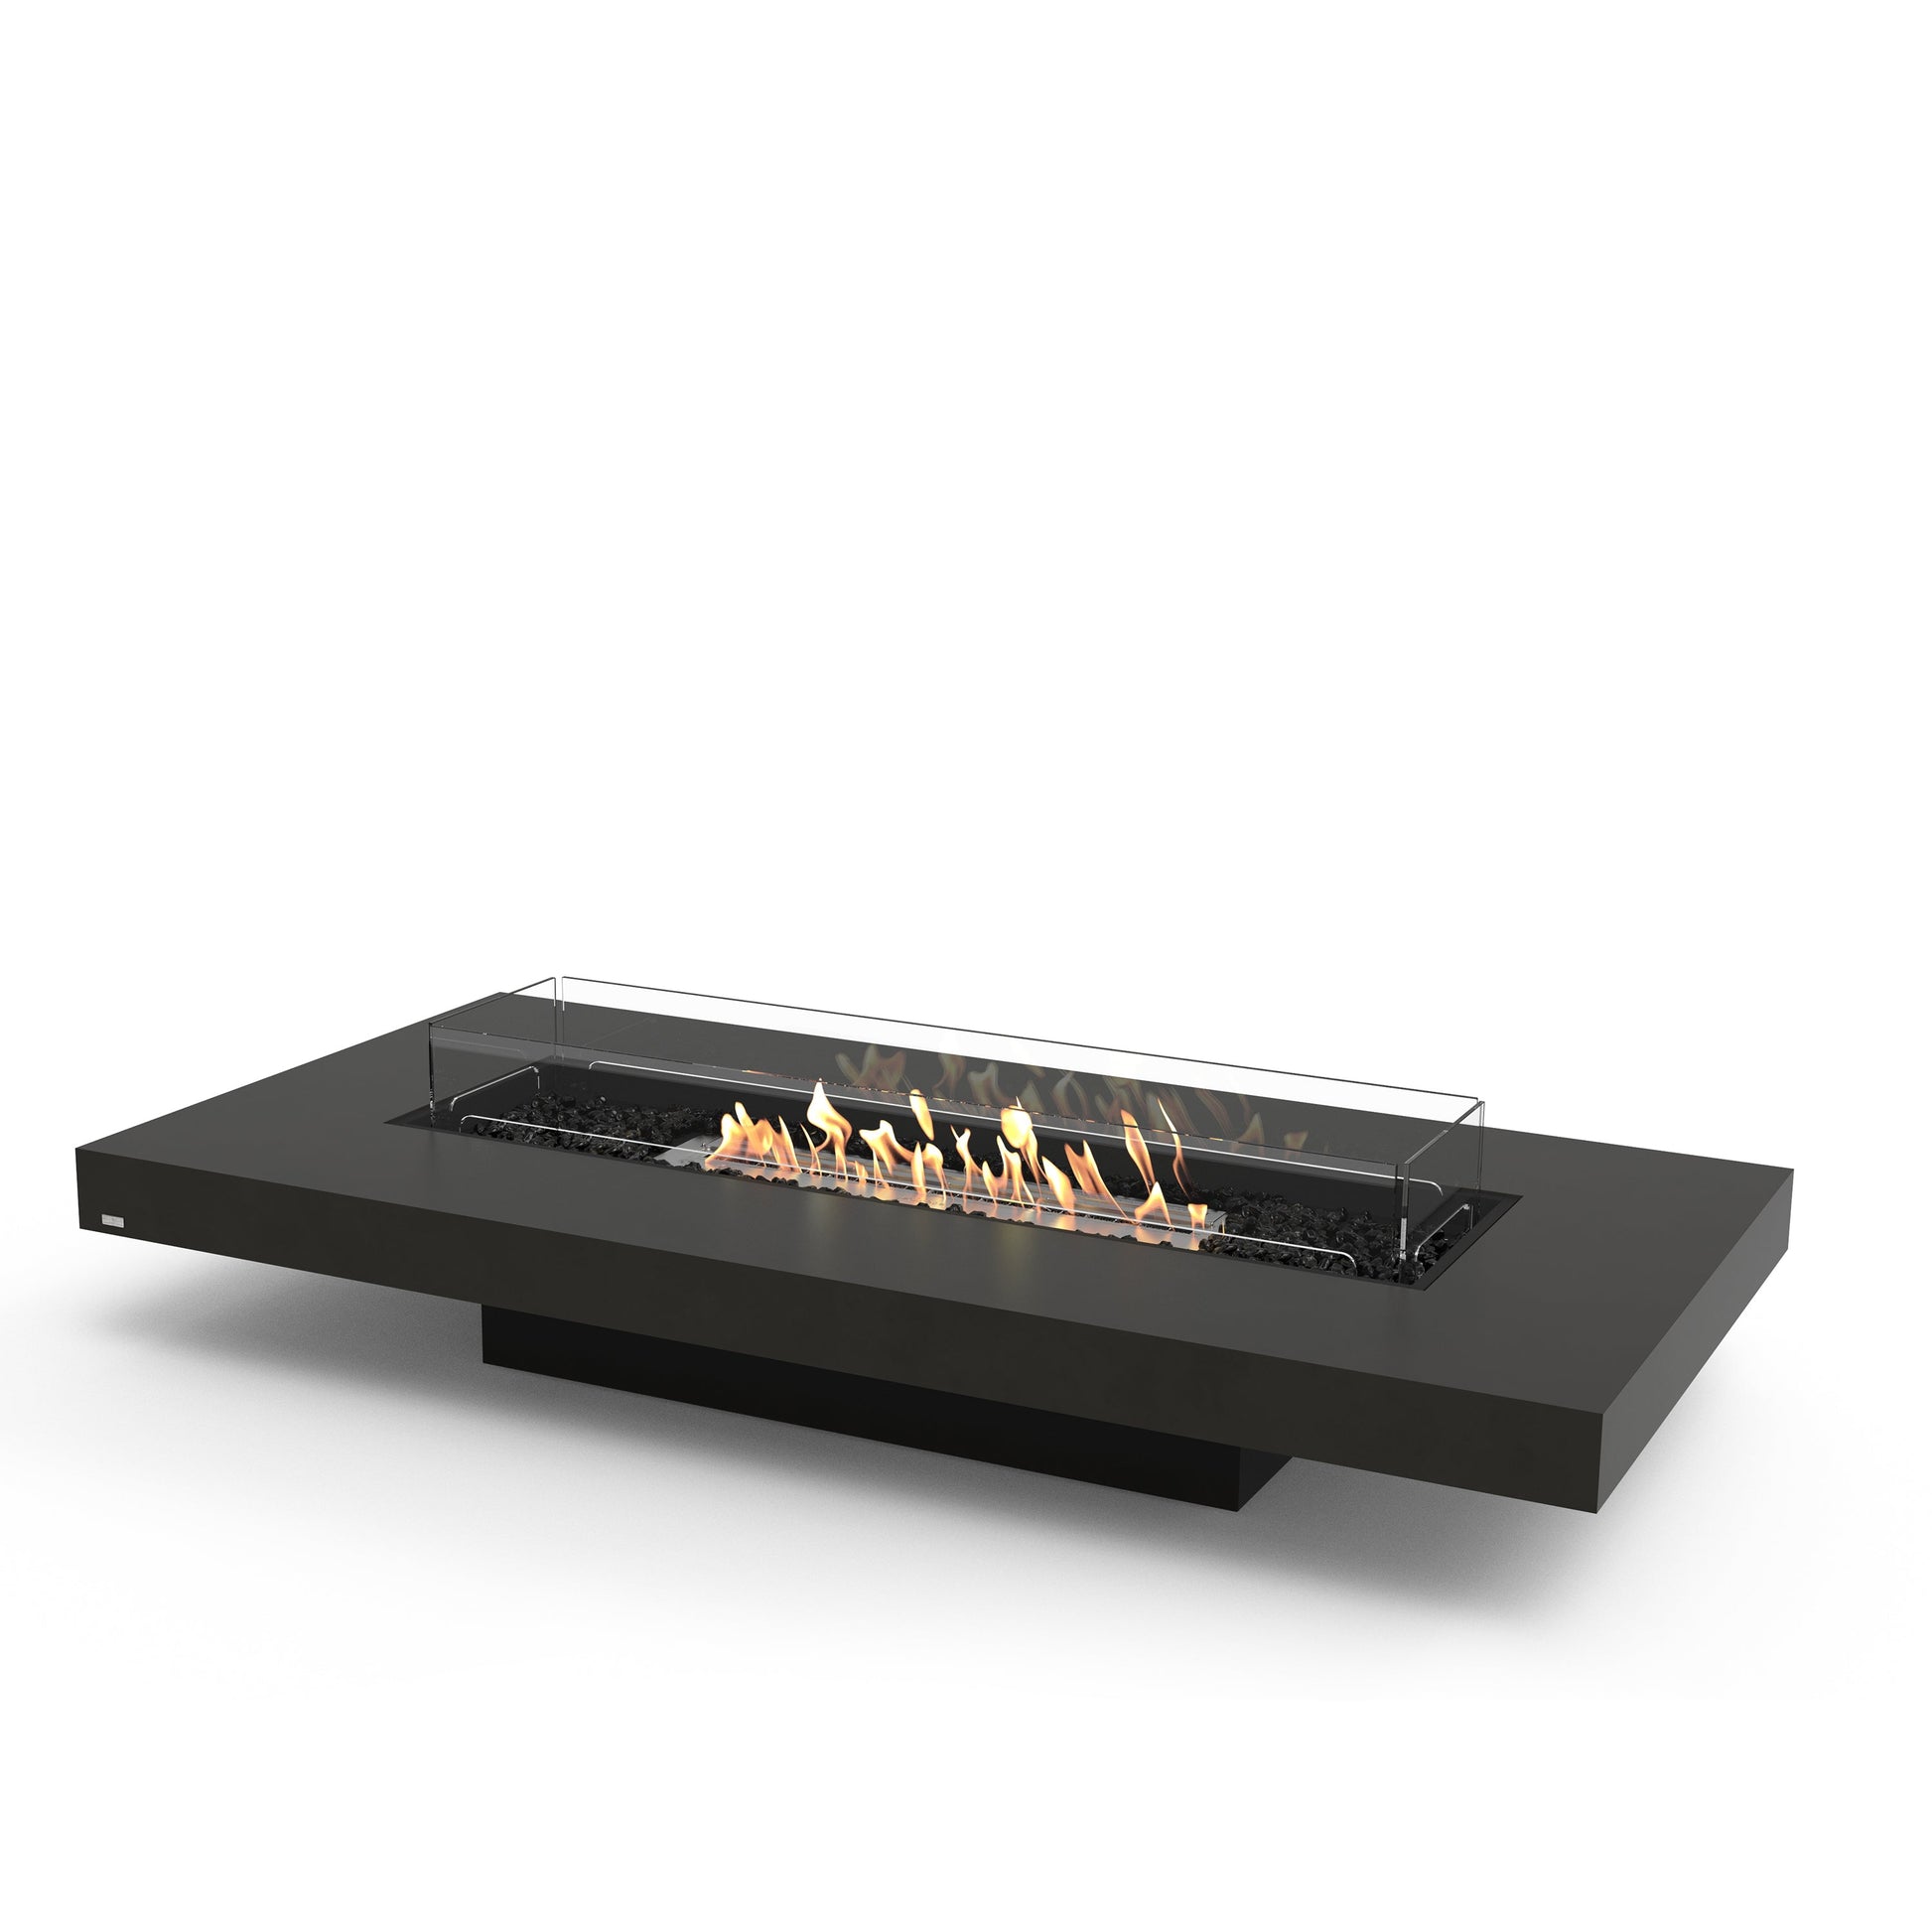 Fire Pit Table EcoSmart Fire 89" Gin 90 Low Height Fire Pit Table with Ethanol Burner by Mad Design Group